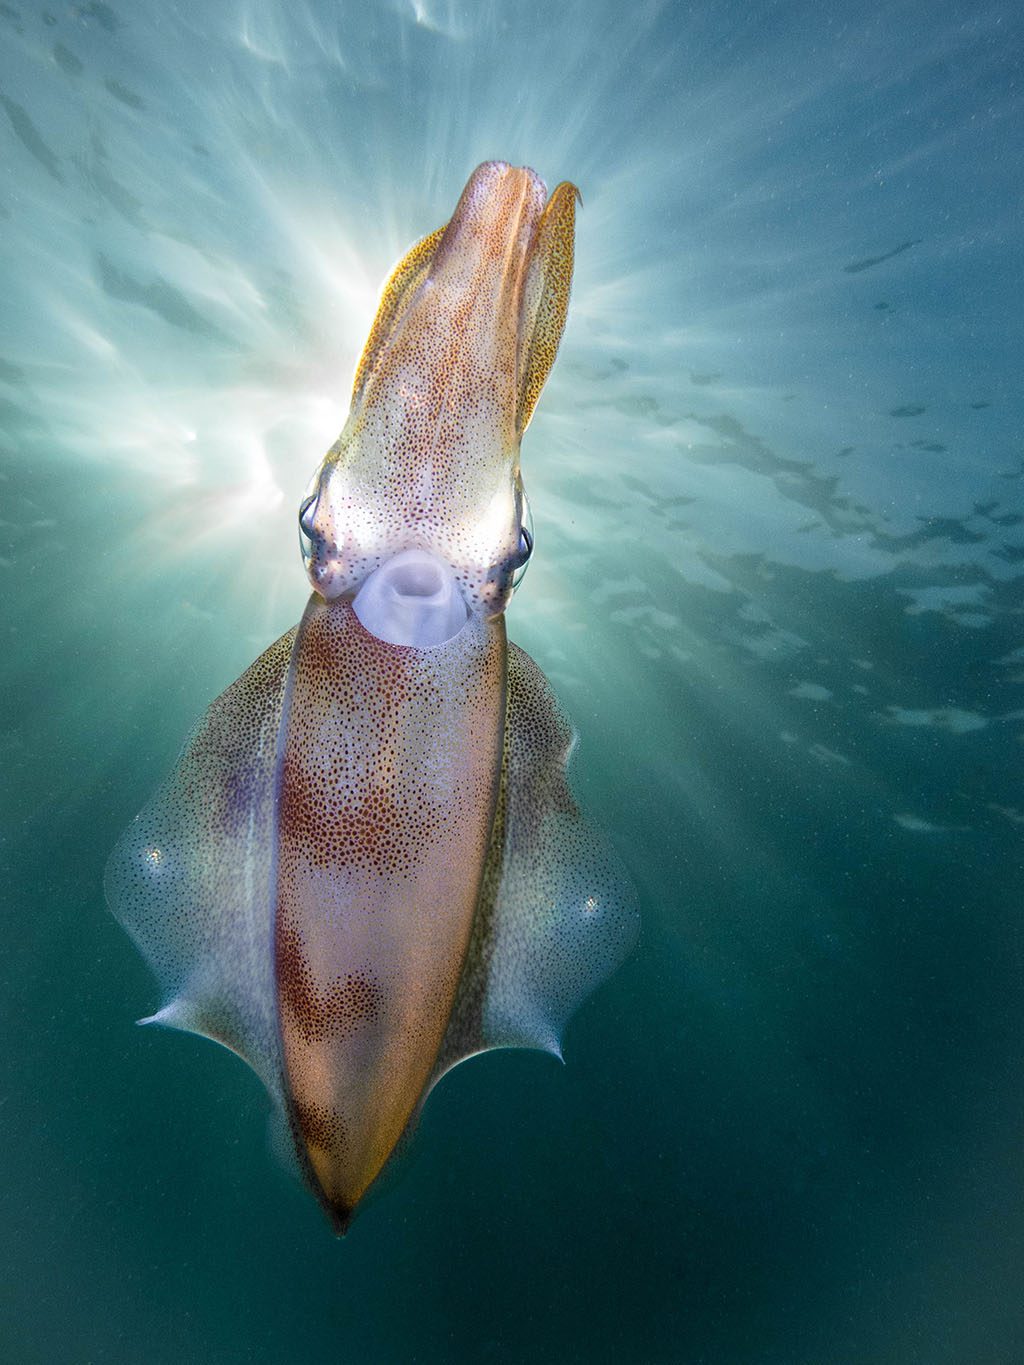 Australasia Underwater Photographer of the Year 2018 Winner Compact Squid by PT Hirshfield